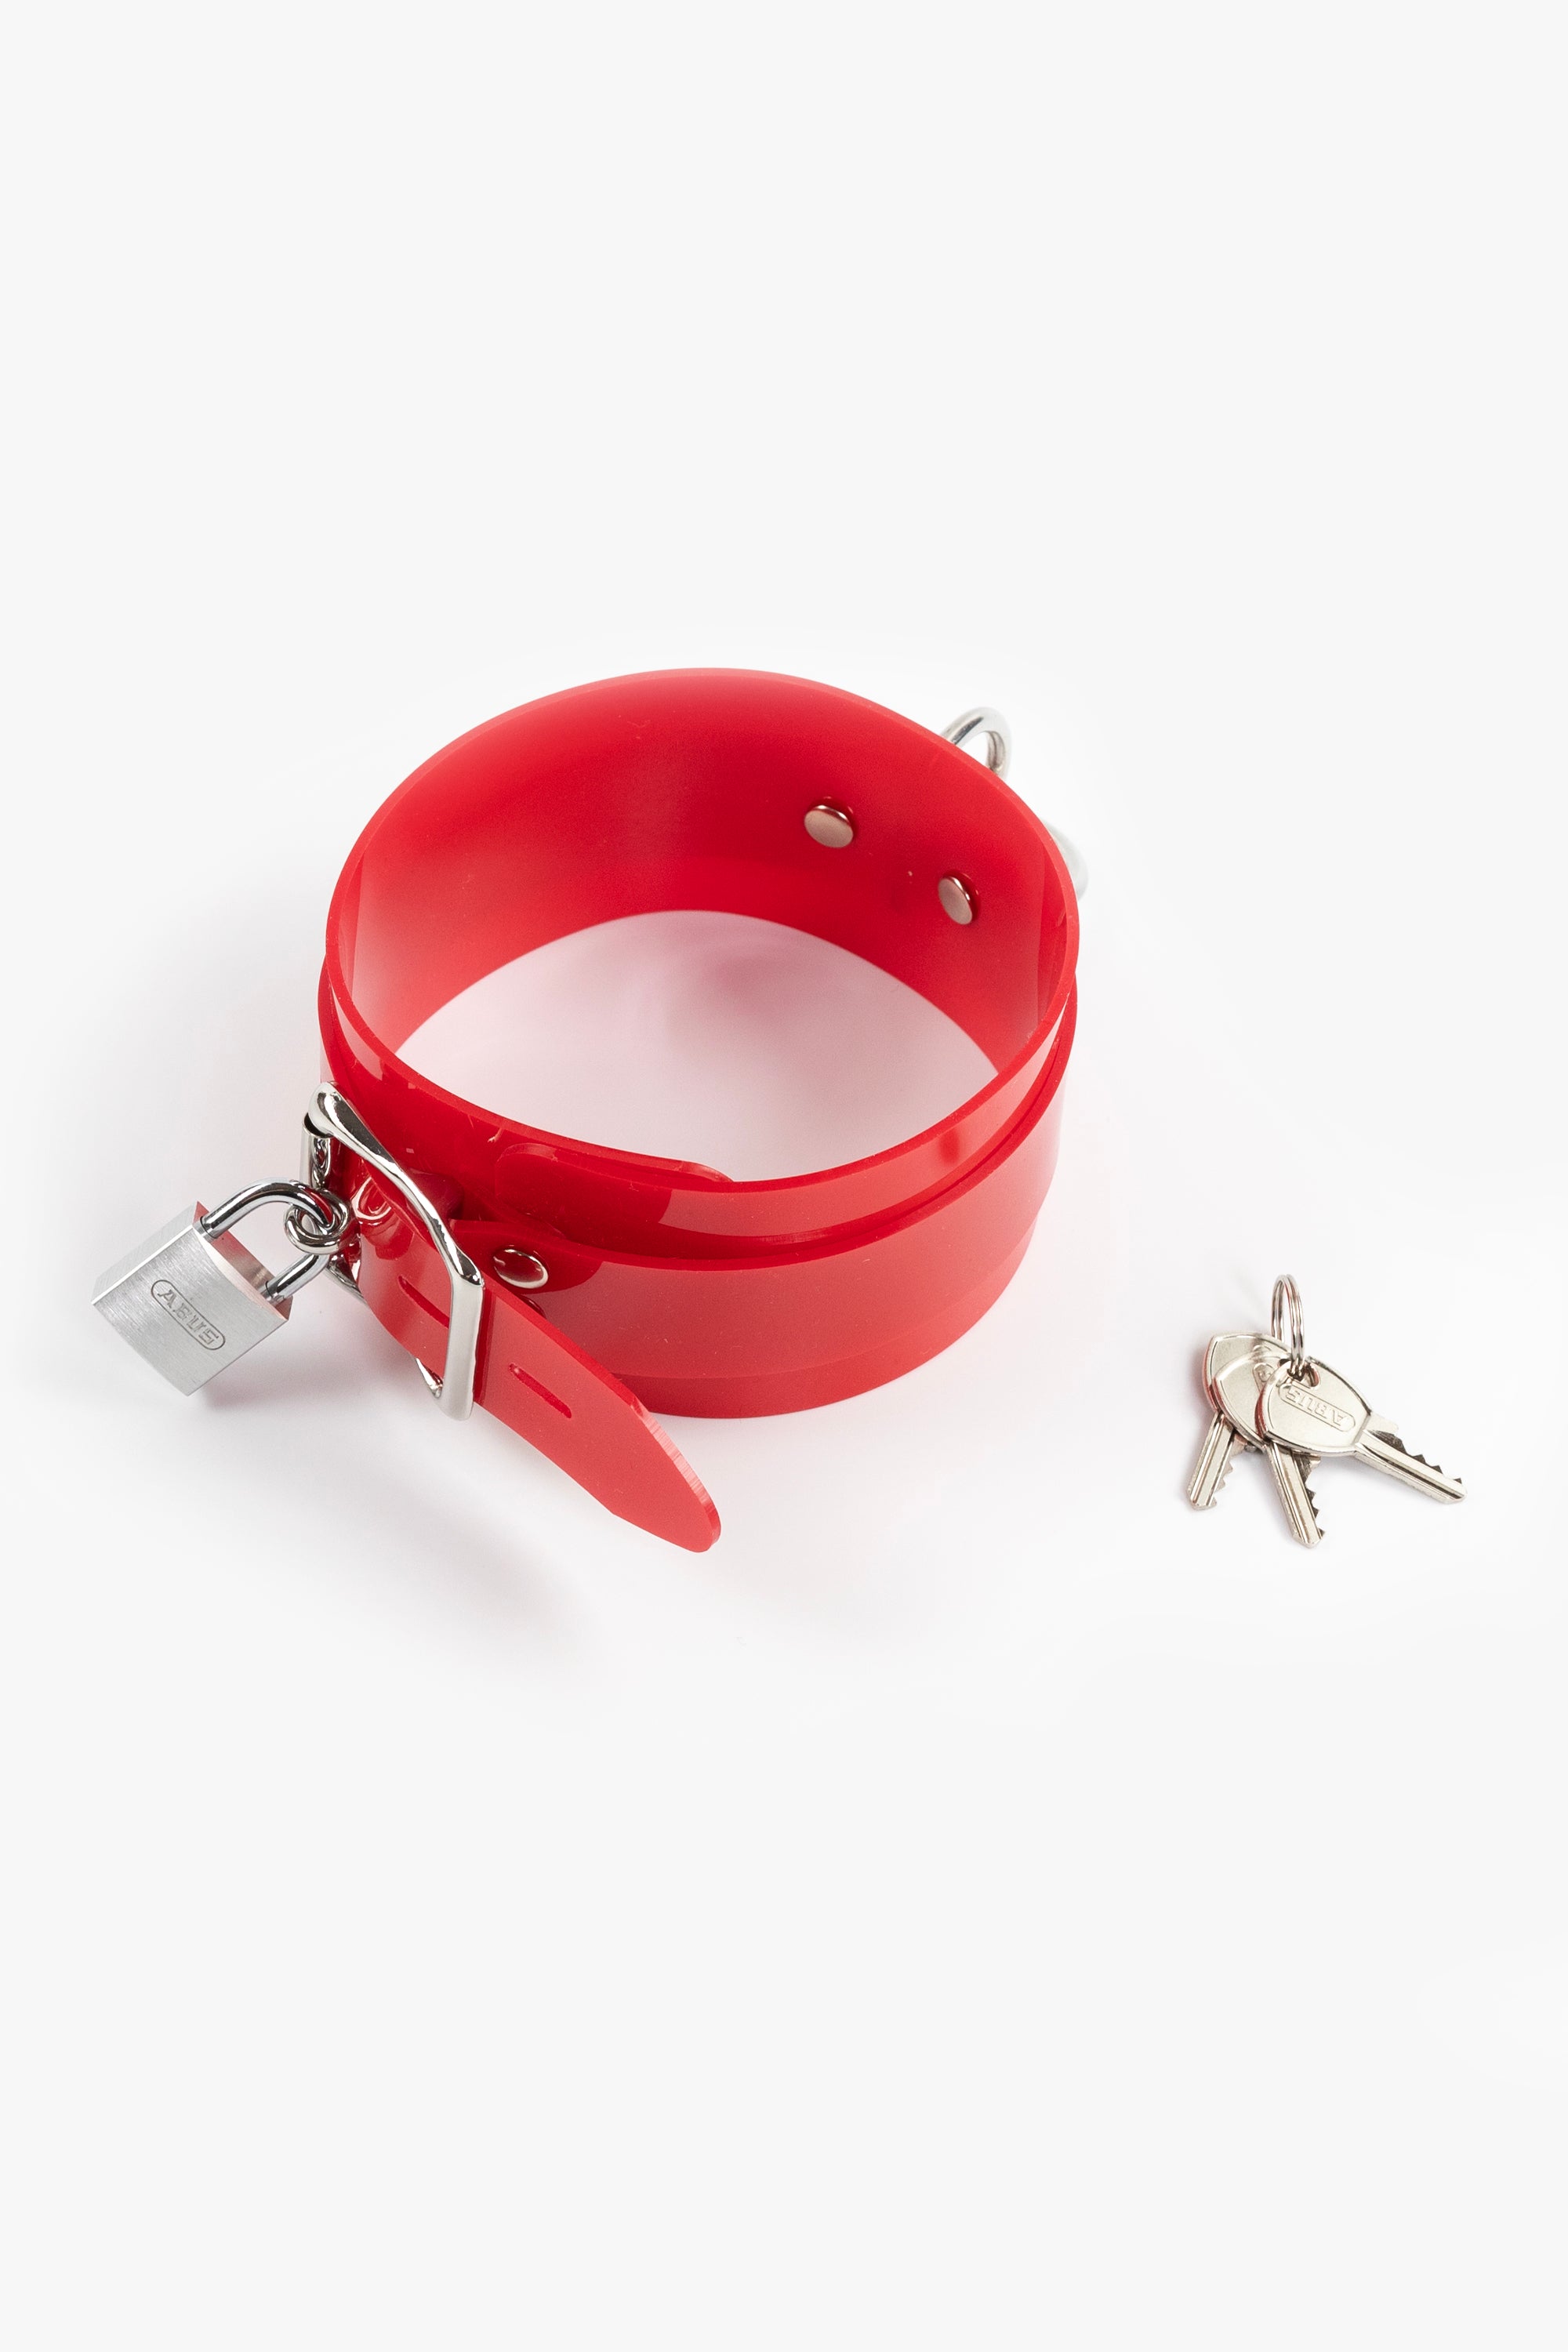 Lockable collar with O-ring attached, red/chrome